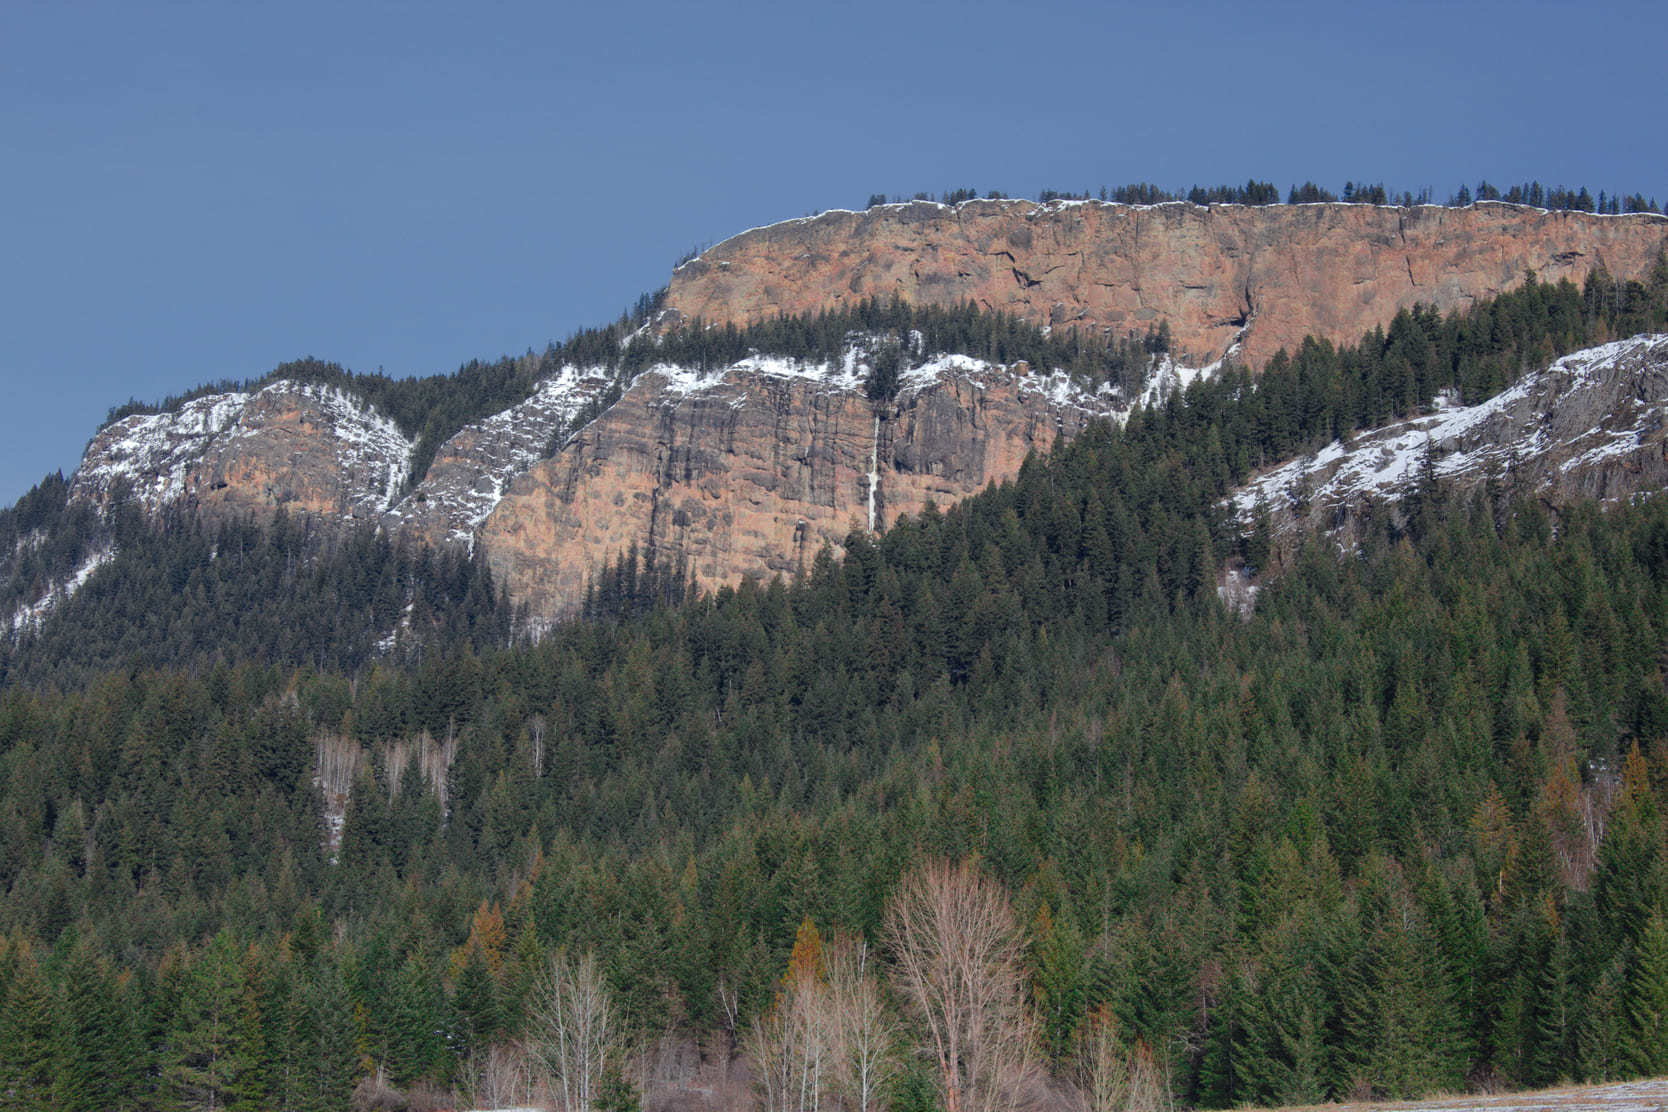 View of the Enderby Cliffs from the city of Enderby, British Columbia